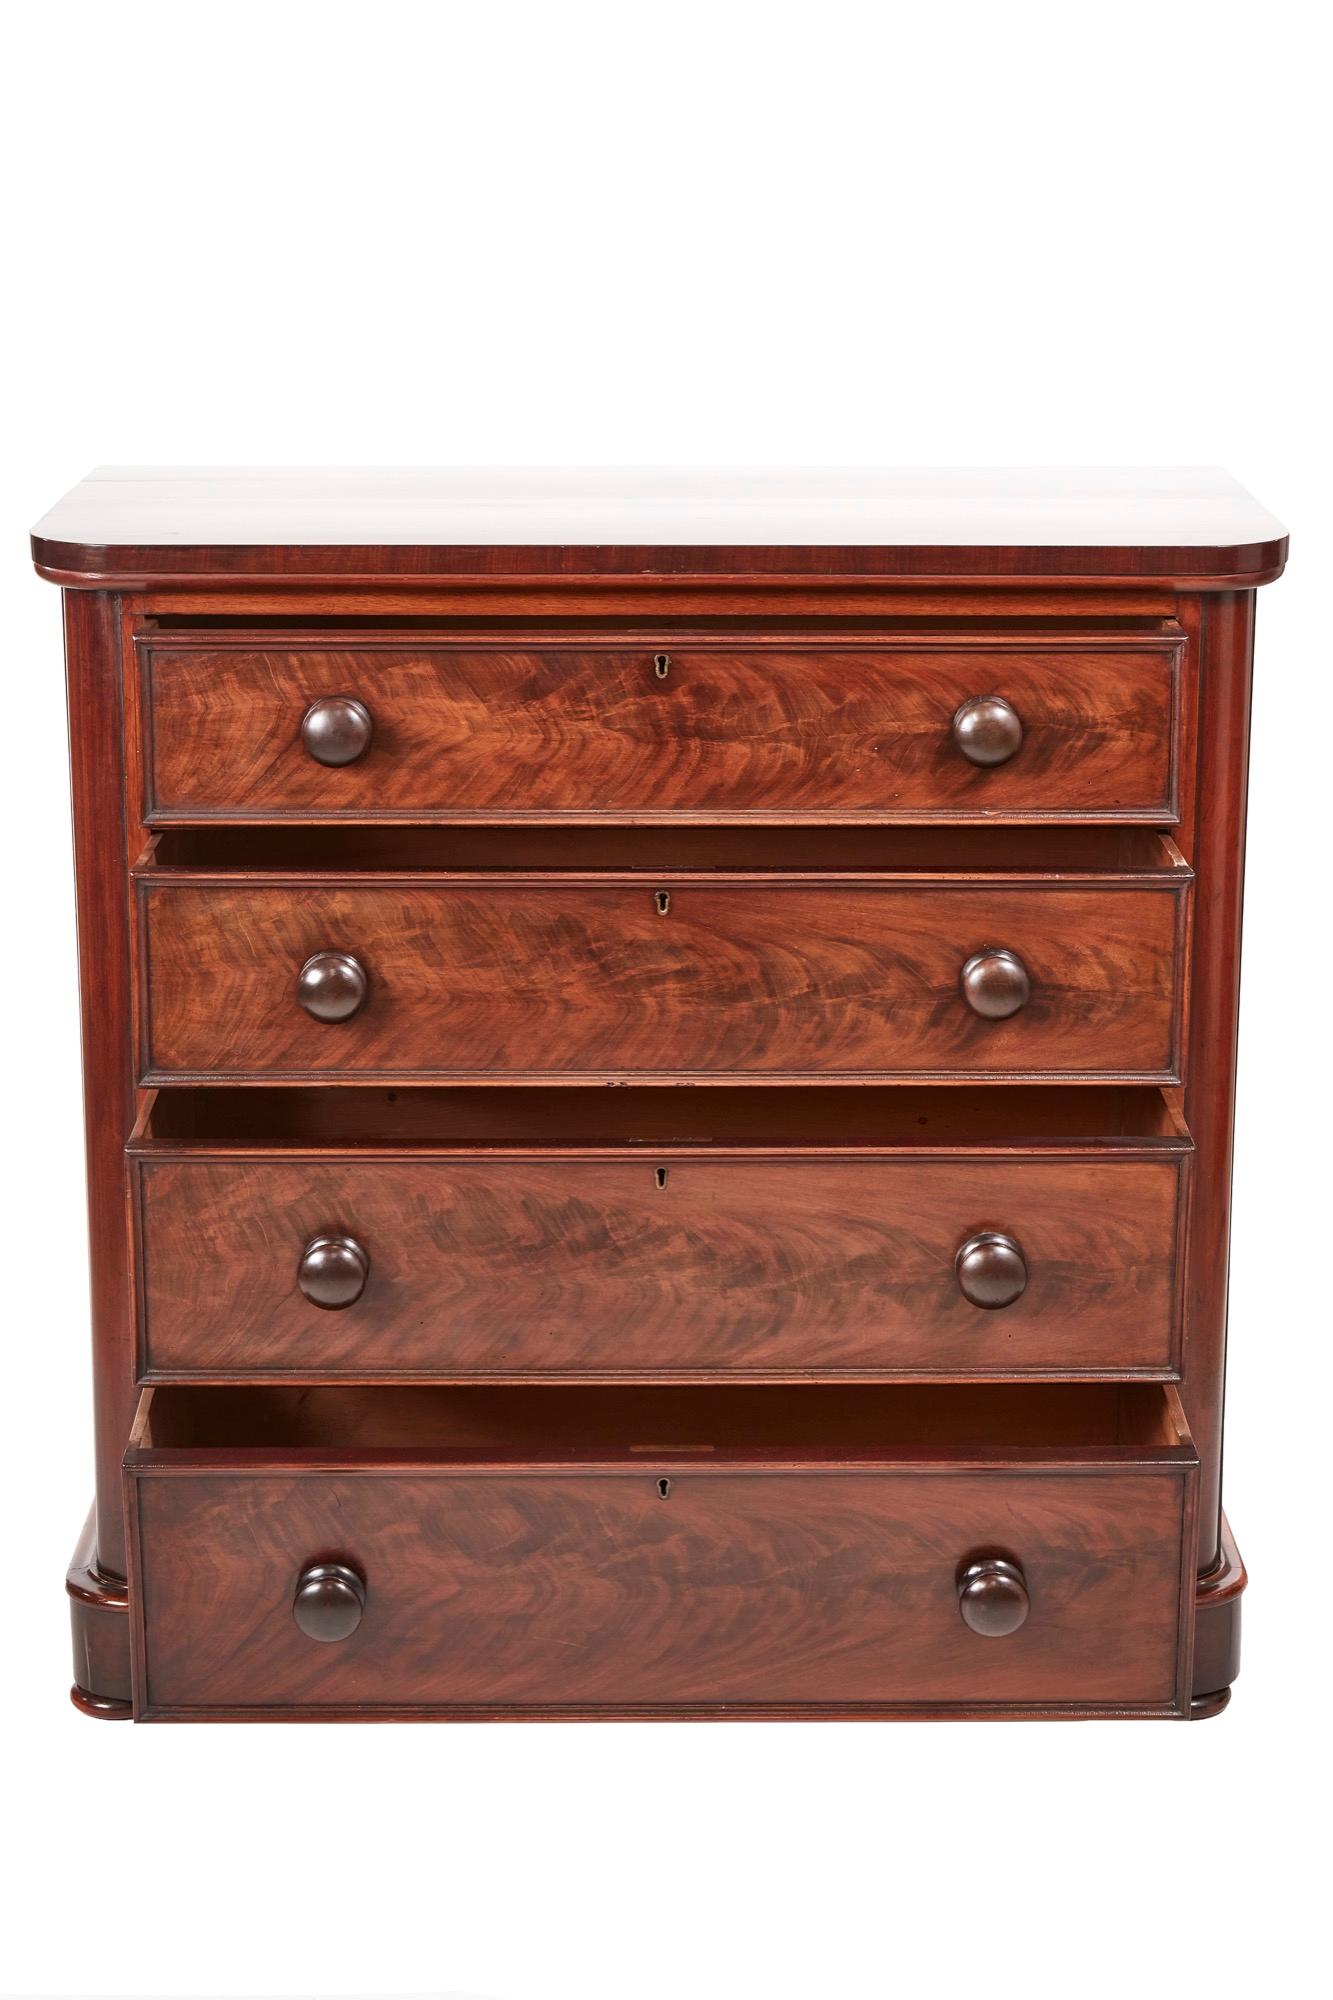 Quality Victorian mahogany chest of drawers, having a lovely mahogany top, four long mahogany drawers with original turned mahogany knobs, lovely molded drawer fronts, standing on a plinth base, original bun feet
Lovely color and